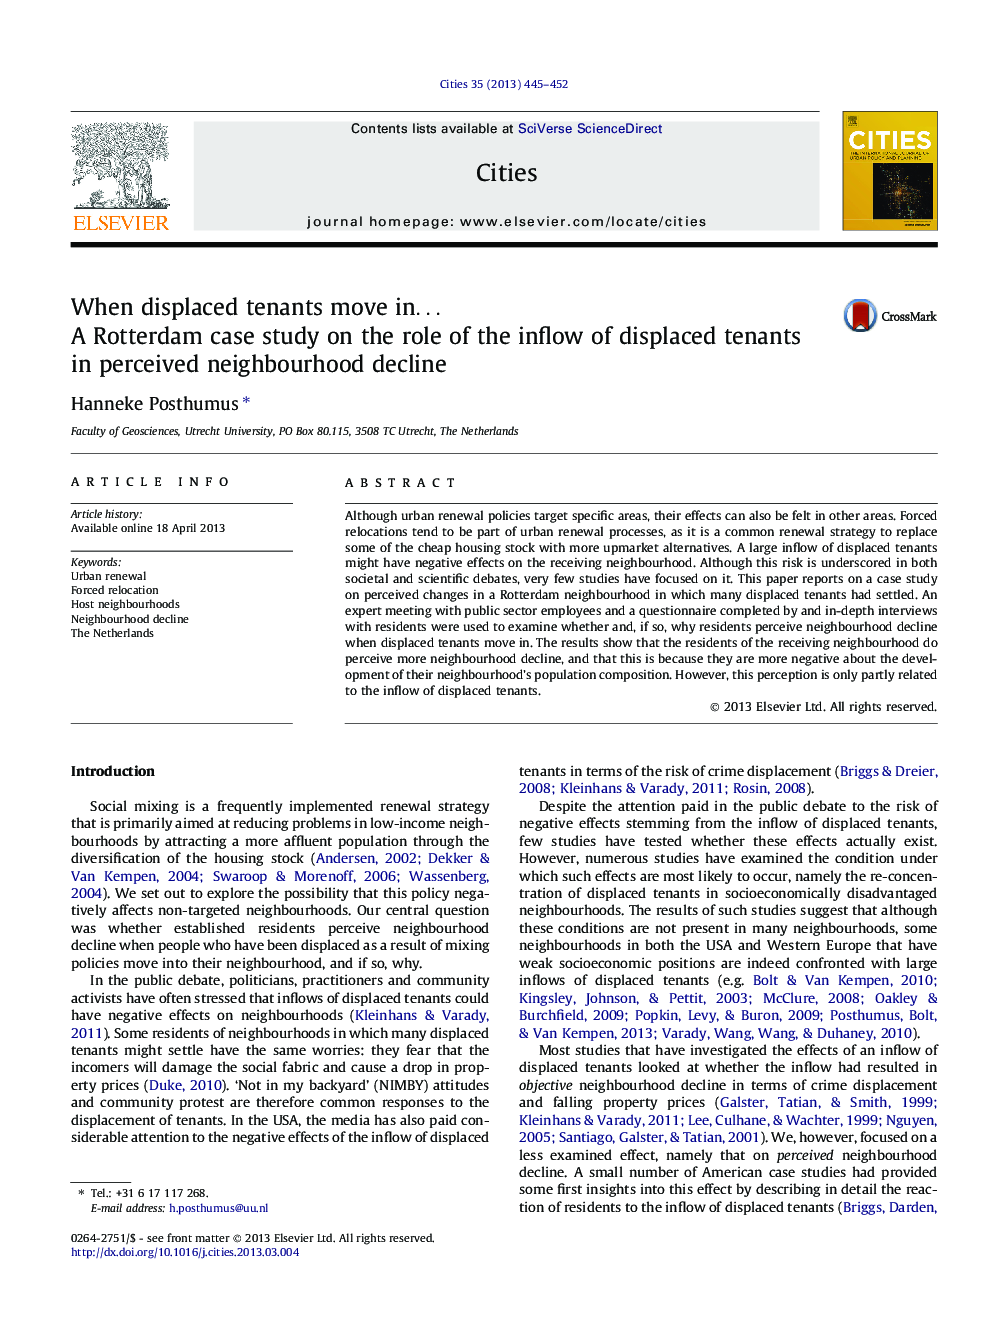 When displaced tenants move in…: A Rotterdam case study on the role of the inflow of displaced tenants in perceived neighbourhood decline